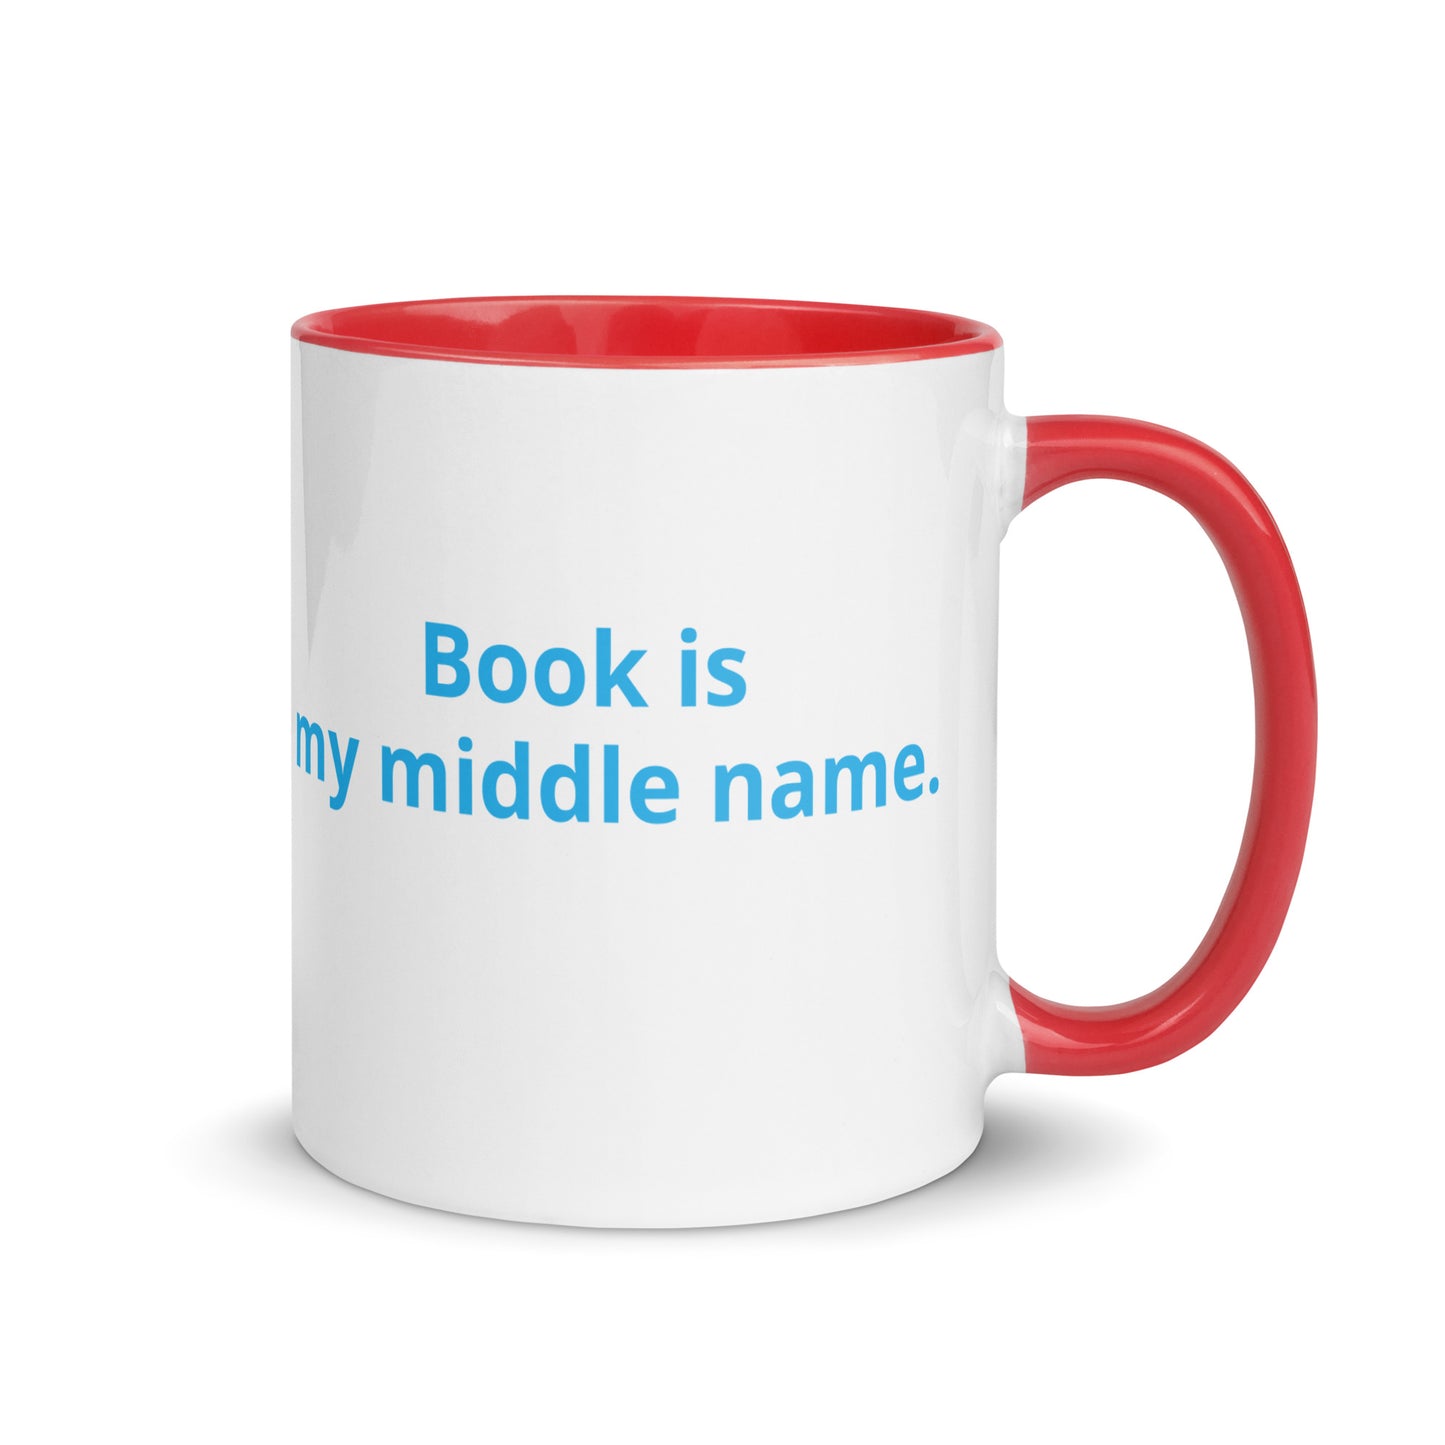 Book is my middle name.